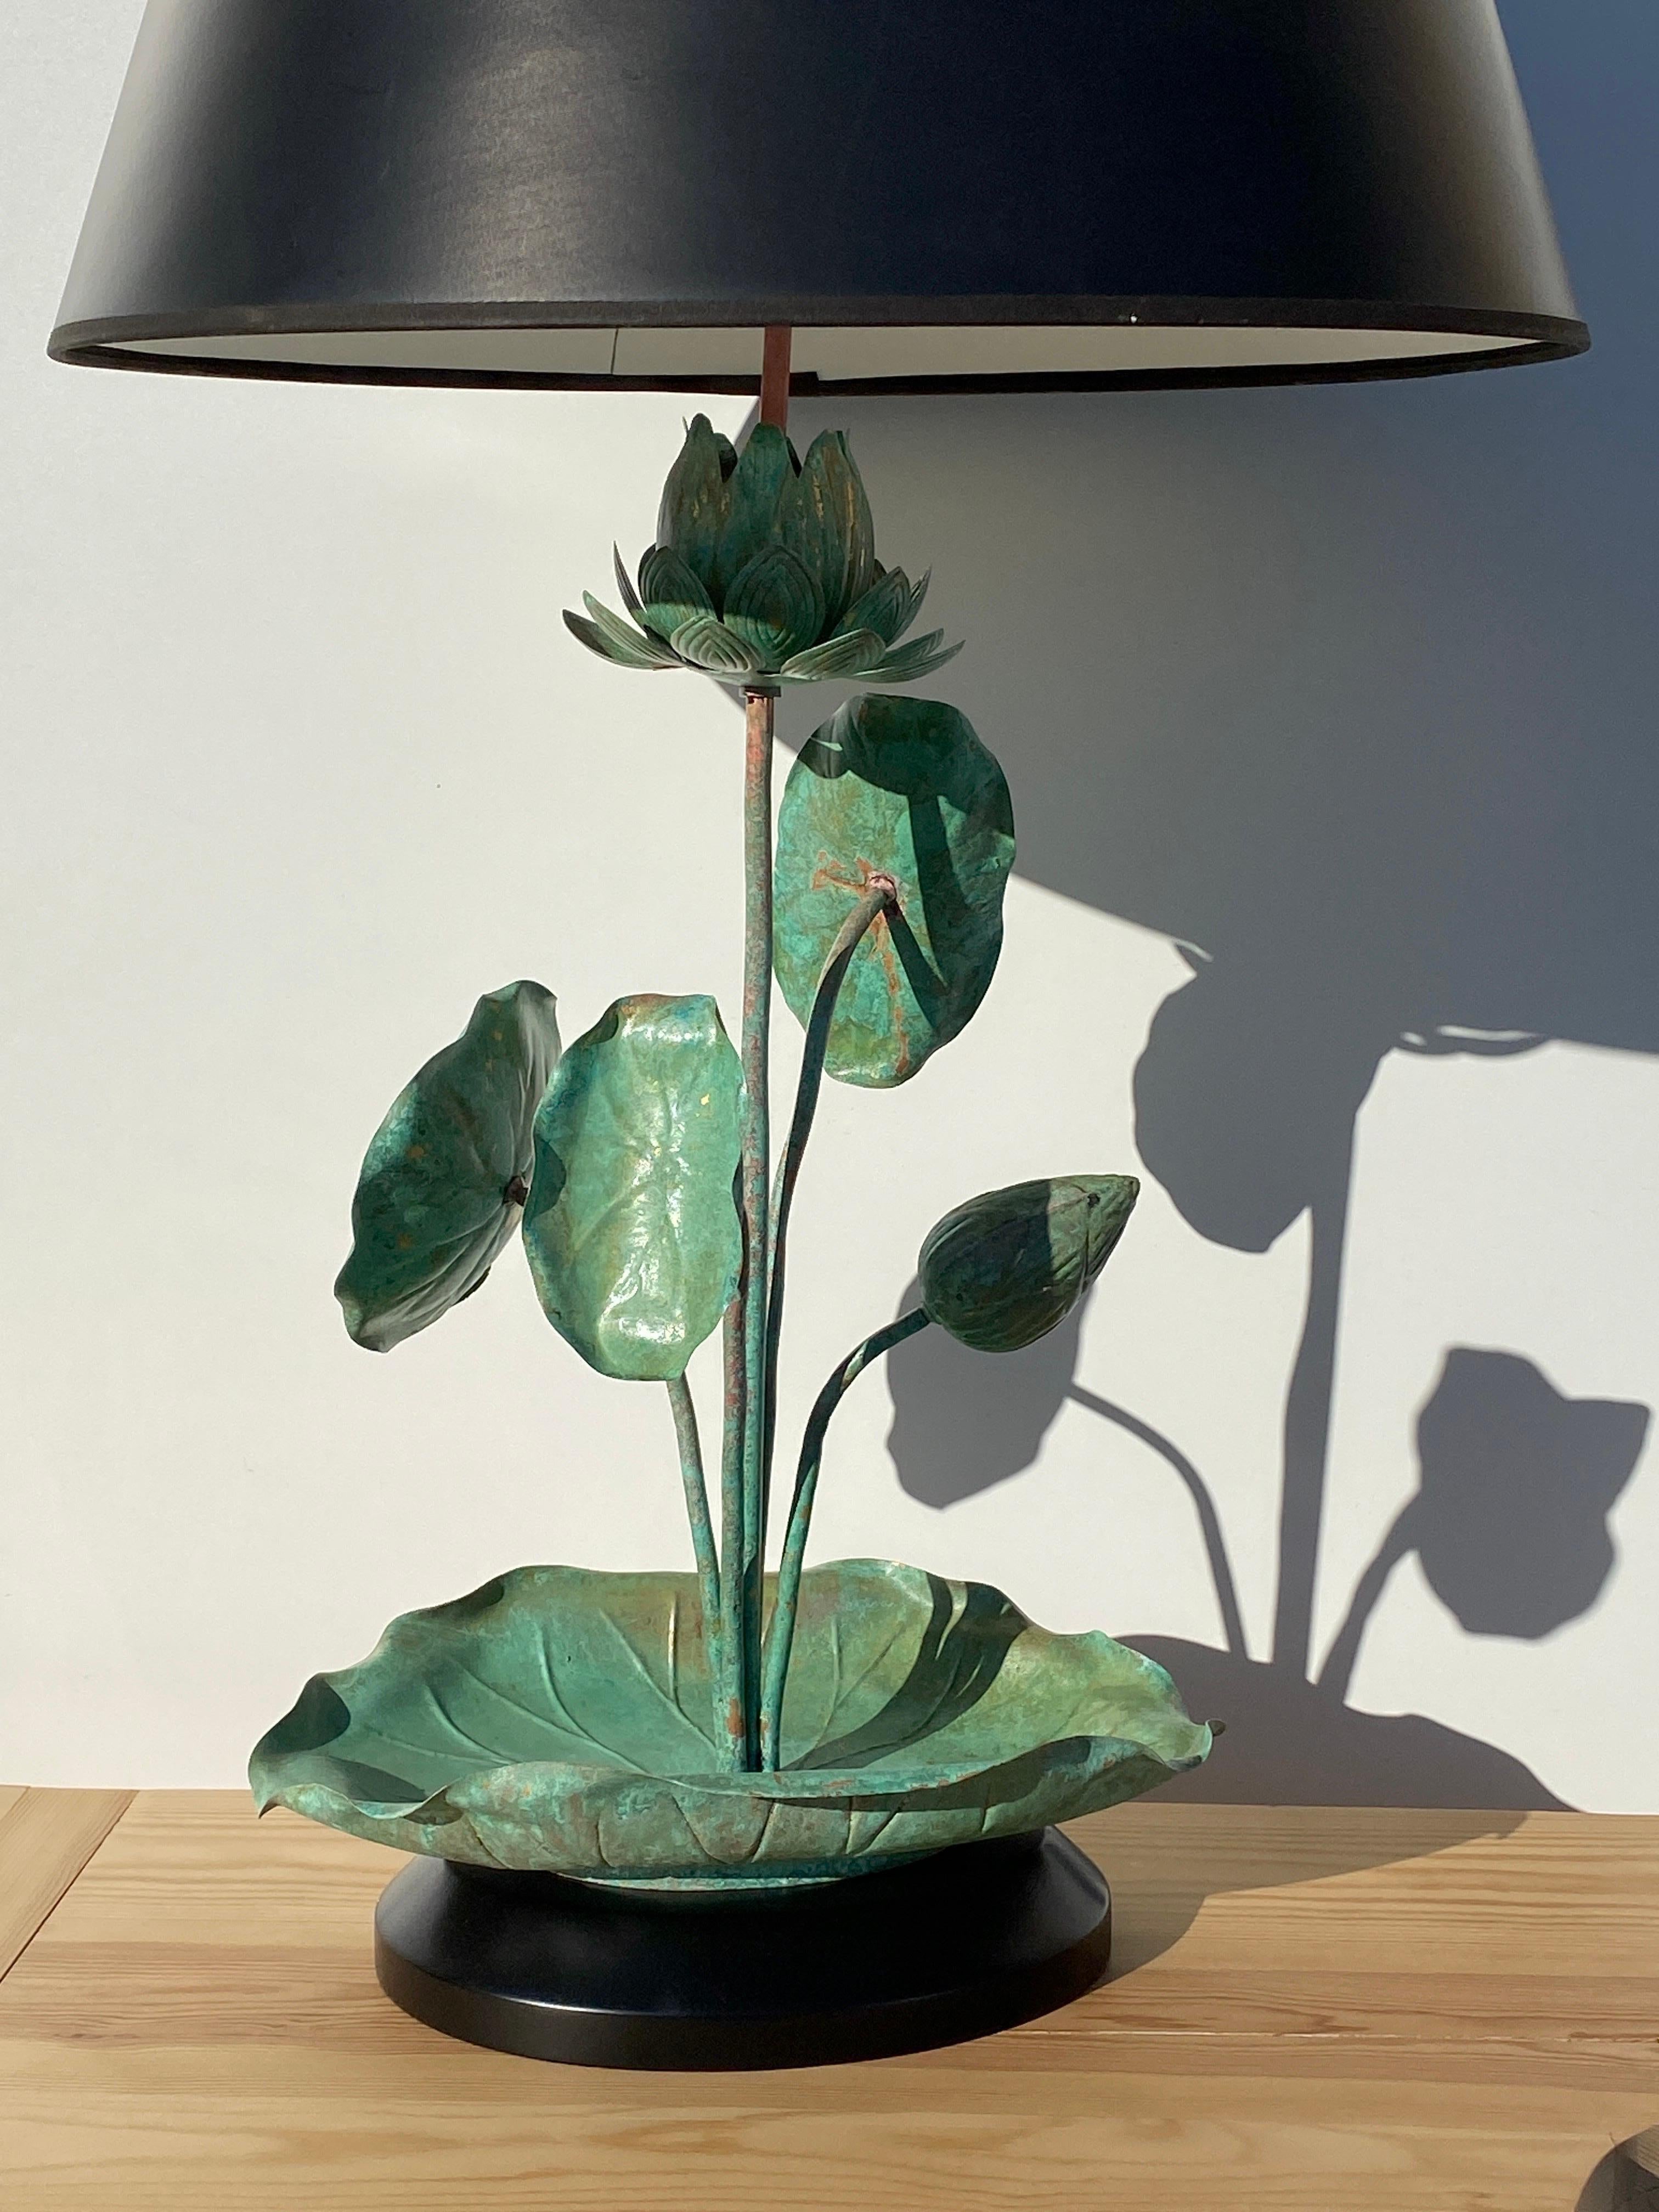 Brass lotus table lamp in verdigris patina attributed to Feldman Lighting Co. Shade not included.